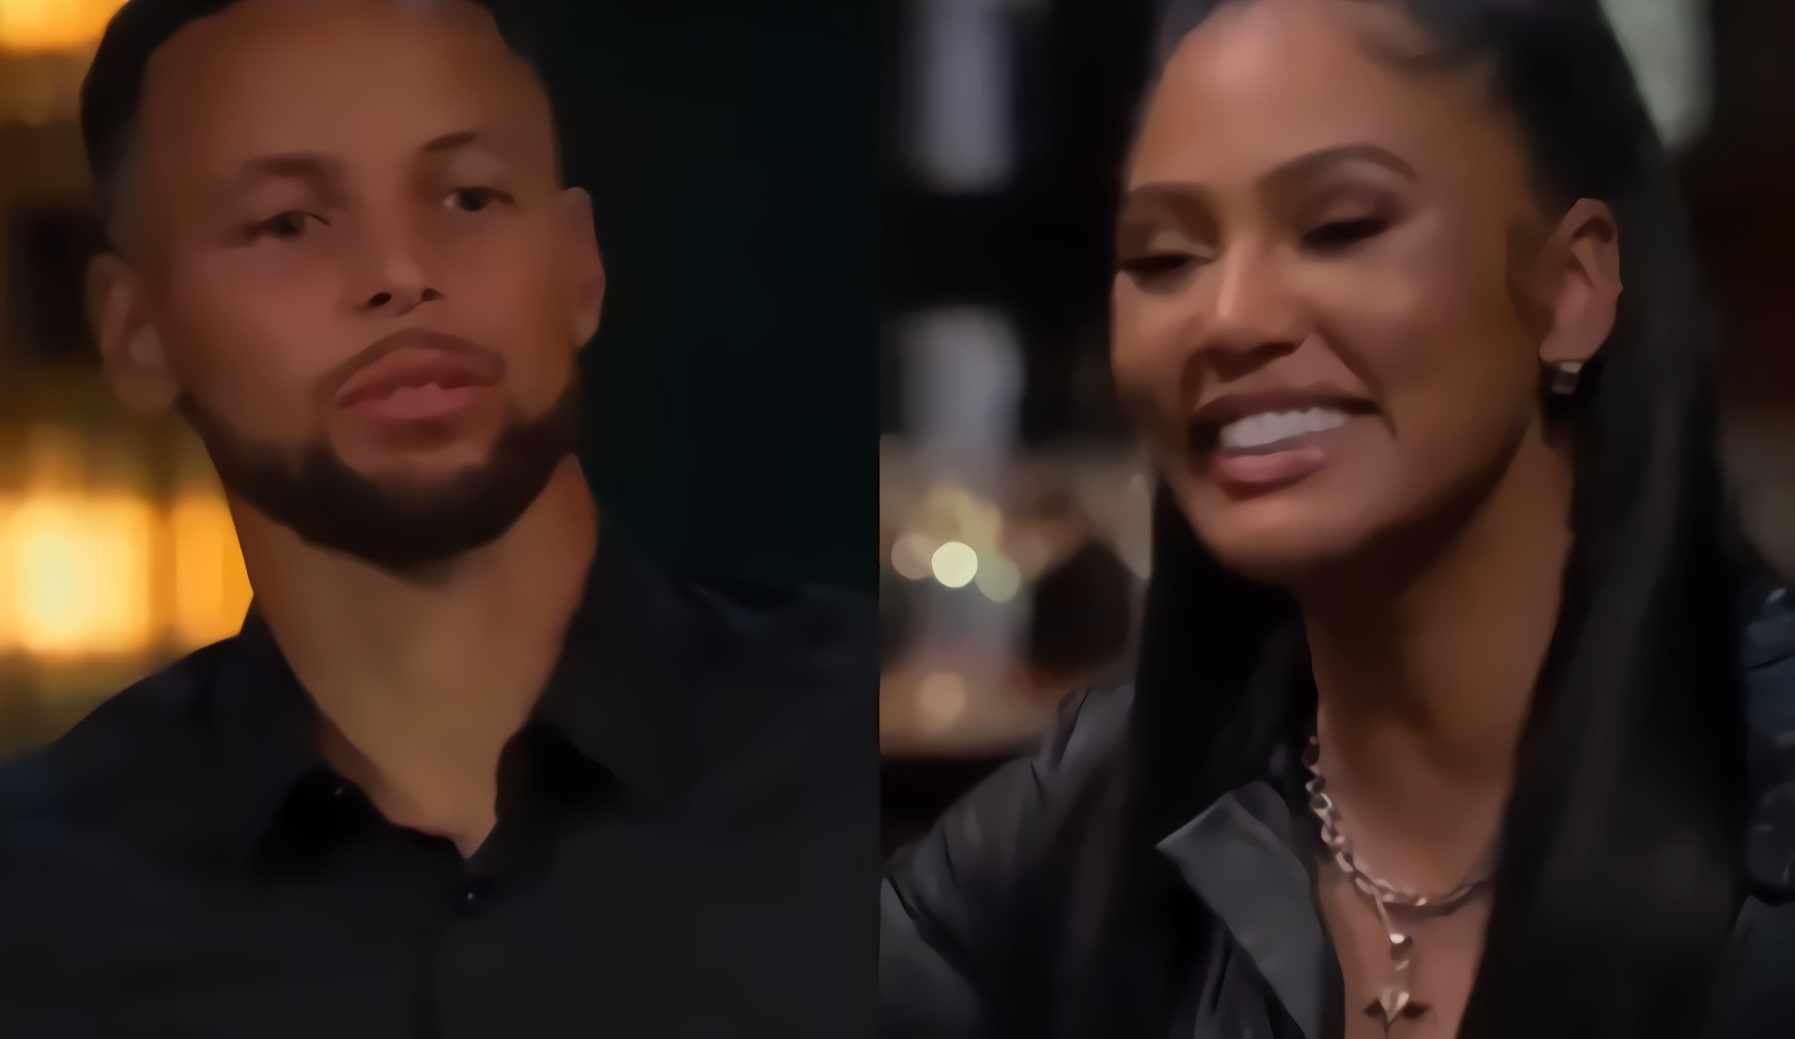 Video: Stephen Curry Can't Live Without $ex Comment to Ayesha Curry Goes Viral